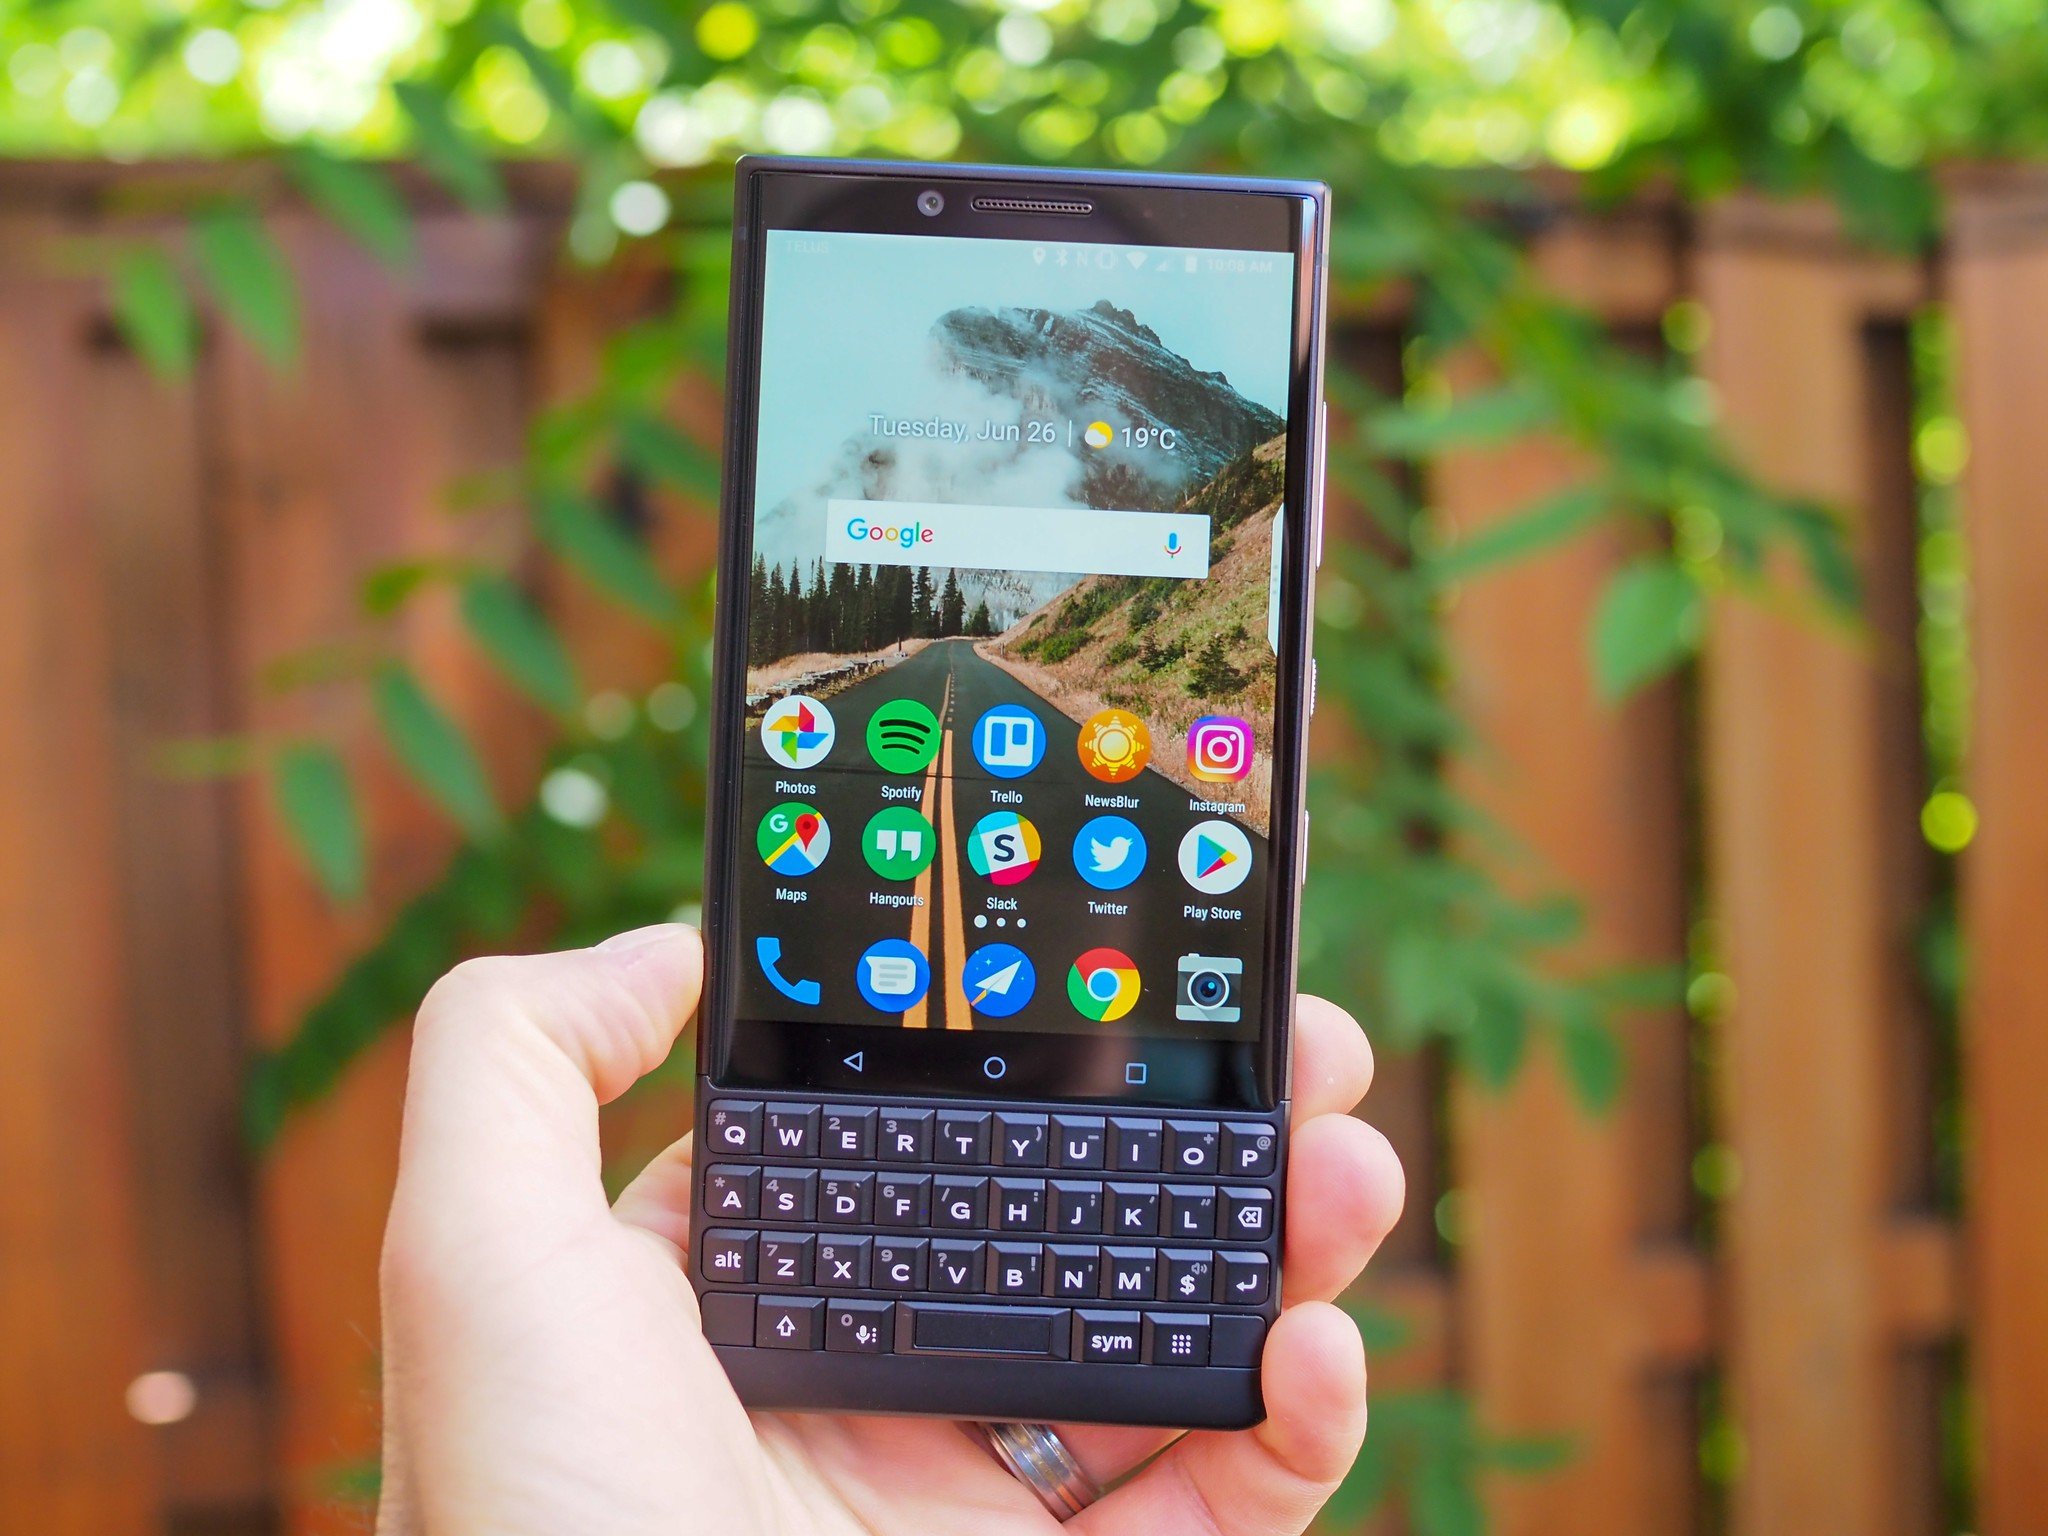 Poll: Are you interested in a new 5G BlackBerry smartphone?